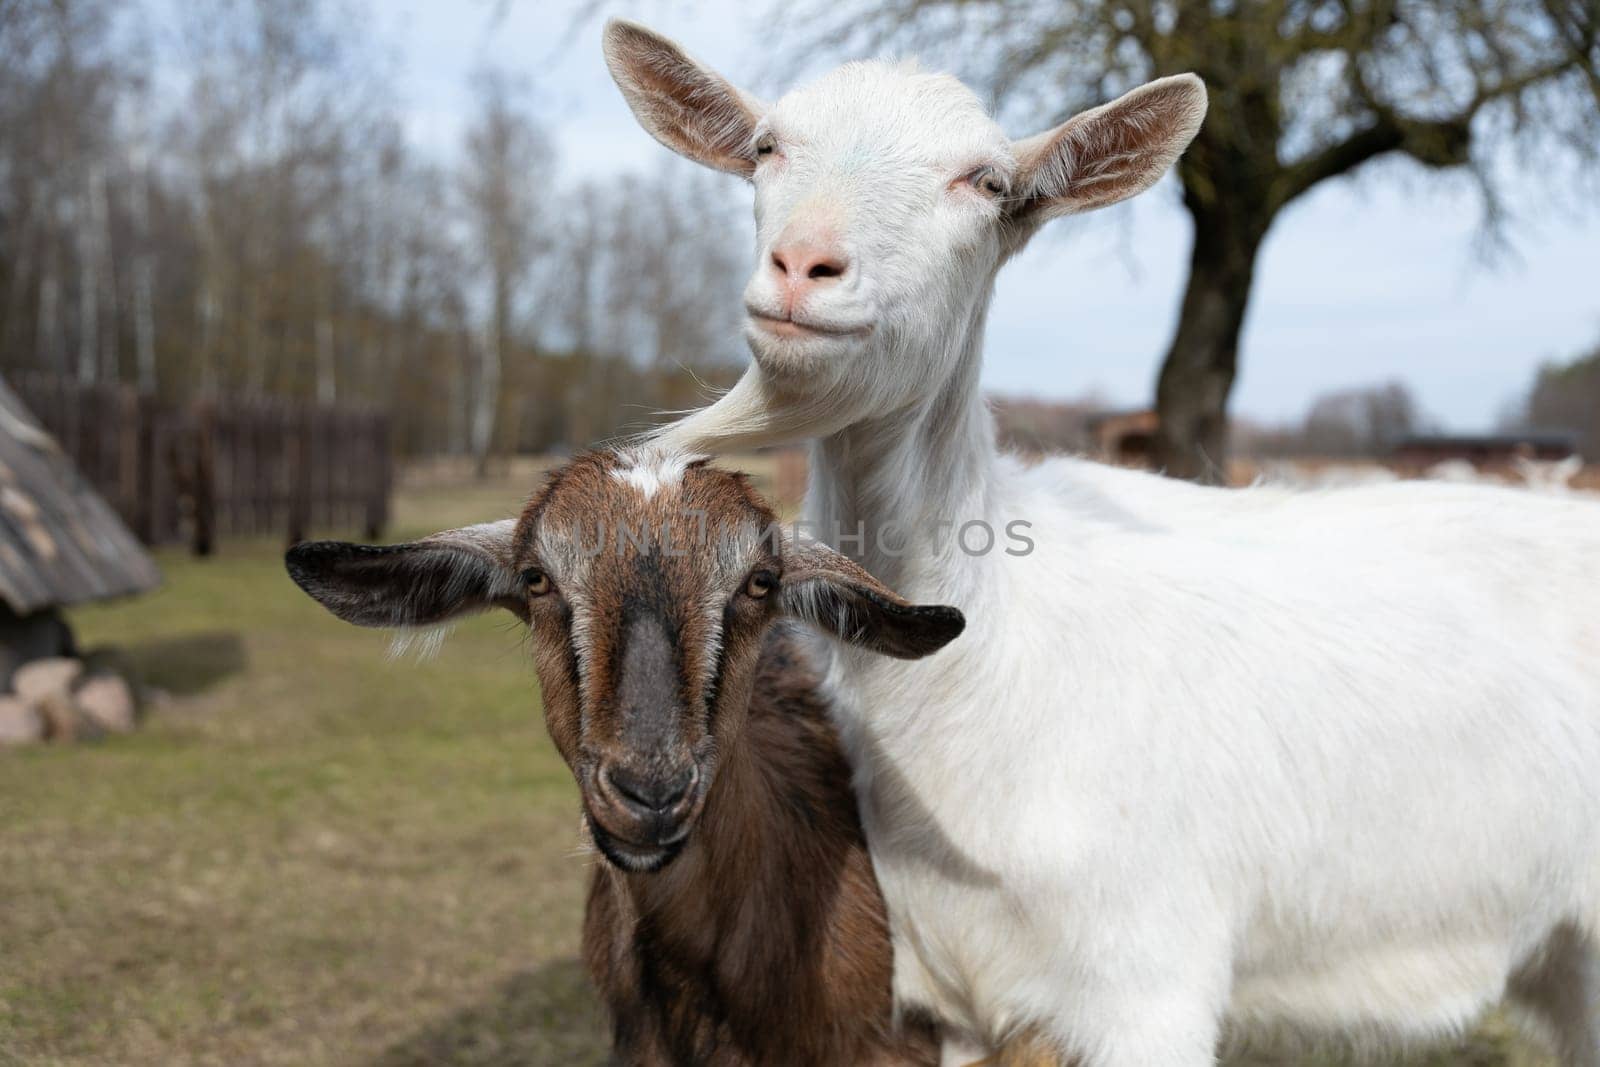 Two Goats Standing Together in a Field by TRMK